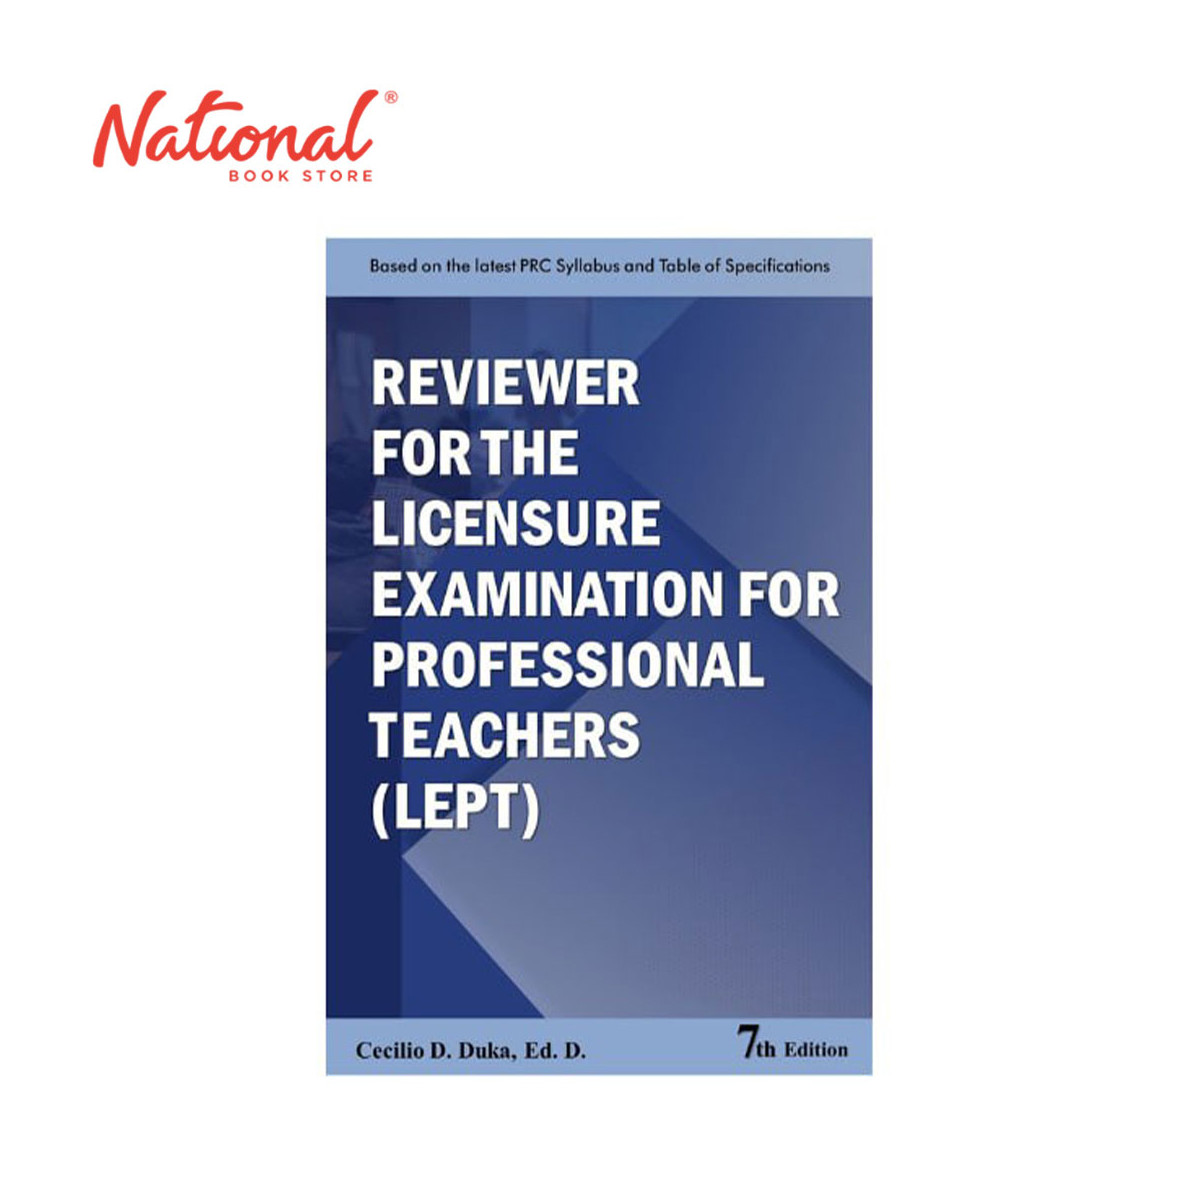 Reviewer For The Licensure Exam For Prof. Teachers 7Th Ed. by Cecilio Duka, Ed. D. - Trade Paperback